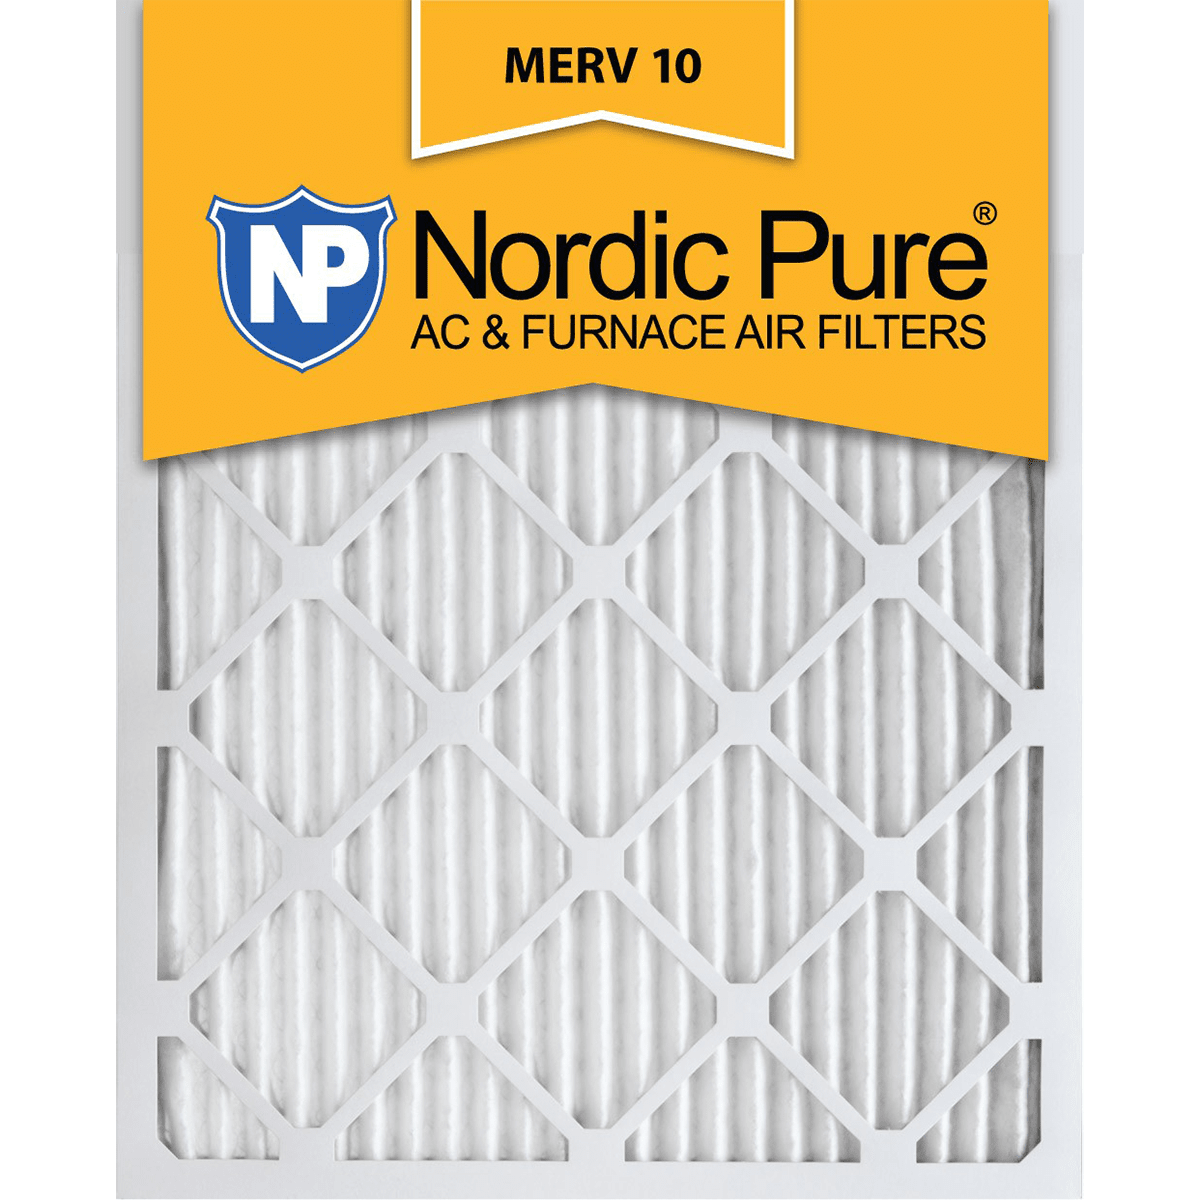 Nordic Pure MERV 10 Pleated Furnace Filter 20x25x1 6-Pack (20x25x1M10-6)